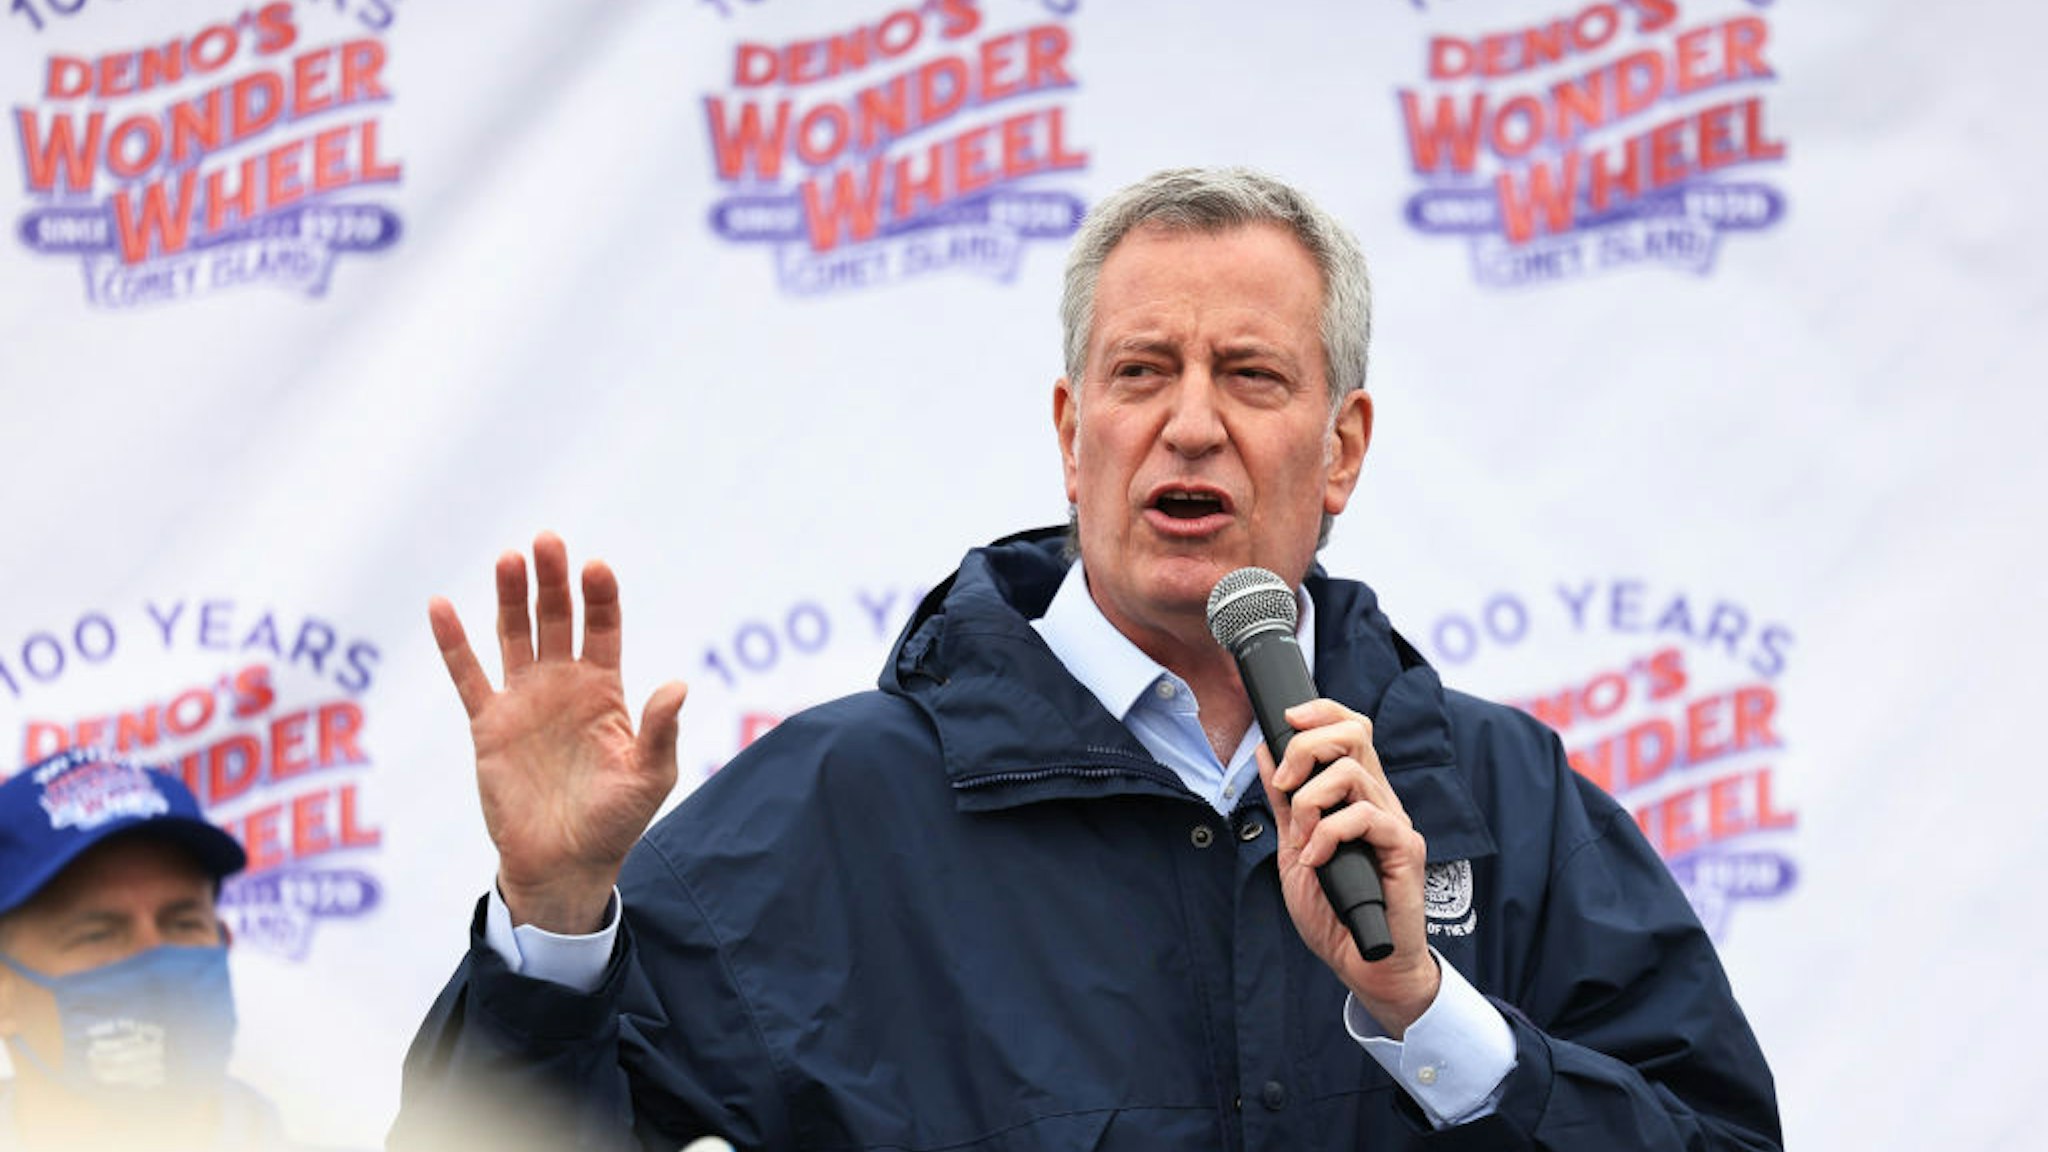 NYC Mayor Bill de Blasio speaks during a Coney Island parks reopening event in the Coney Island neighborhood of Brooklyn borough on April 09, 2021 in New York City.